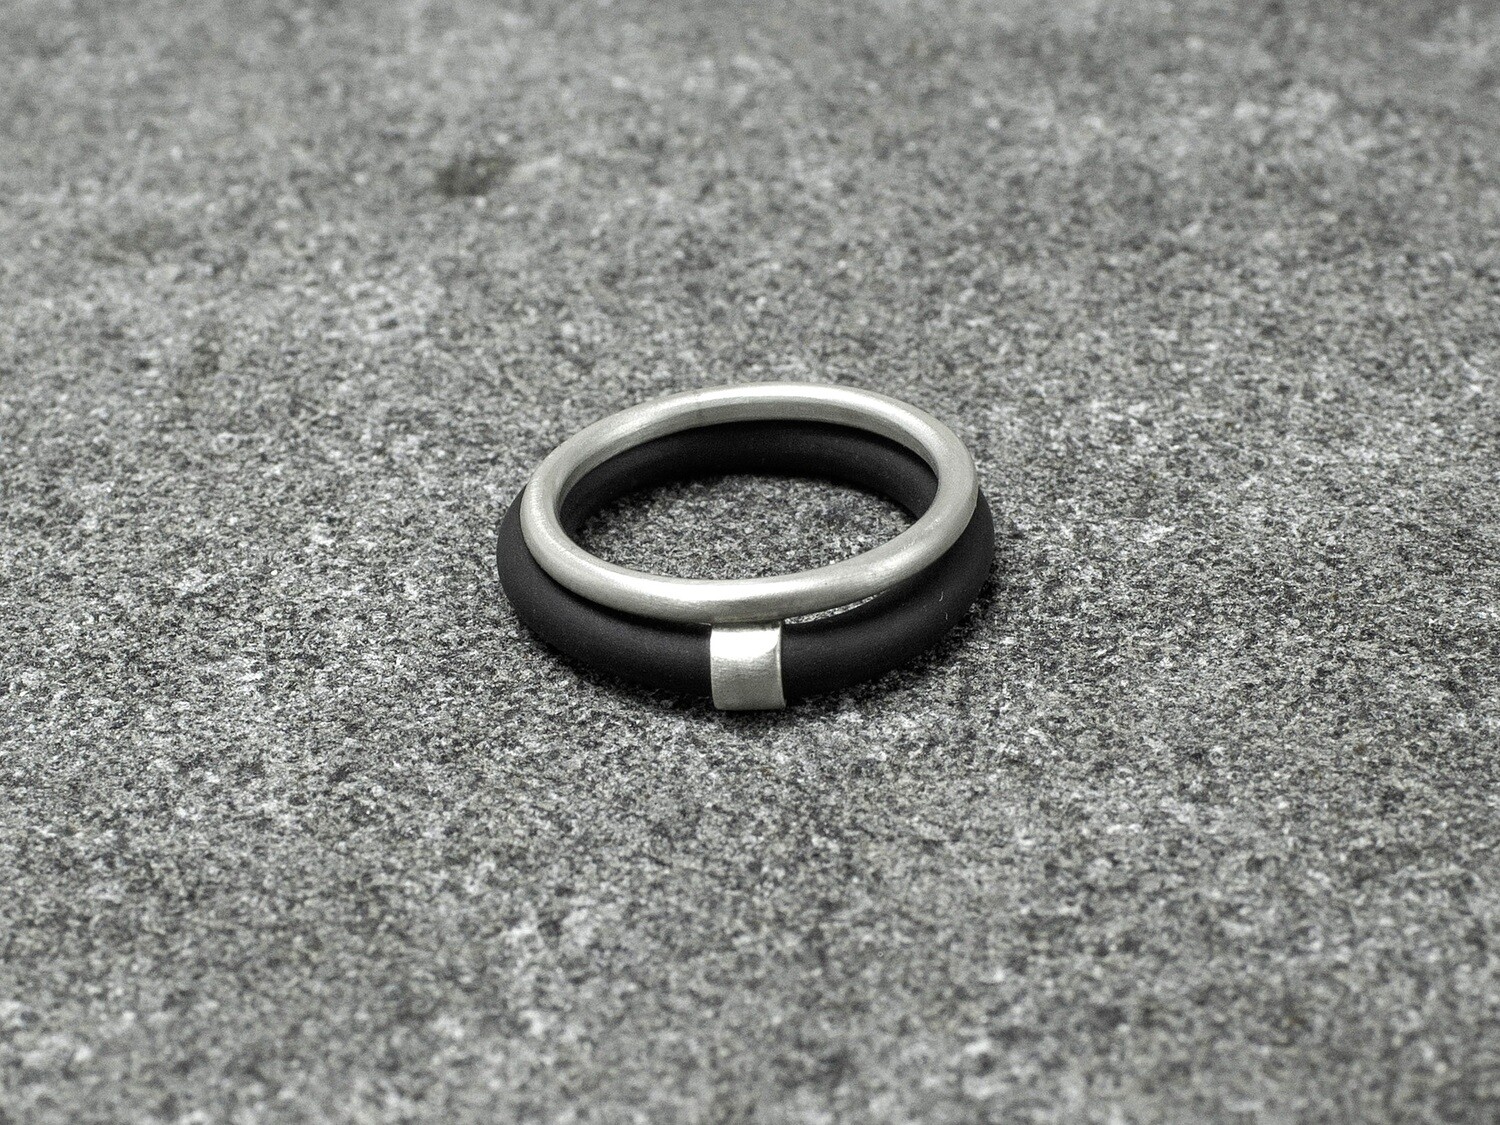 Geometric silver and caoutchouc ring.